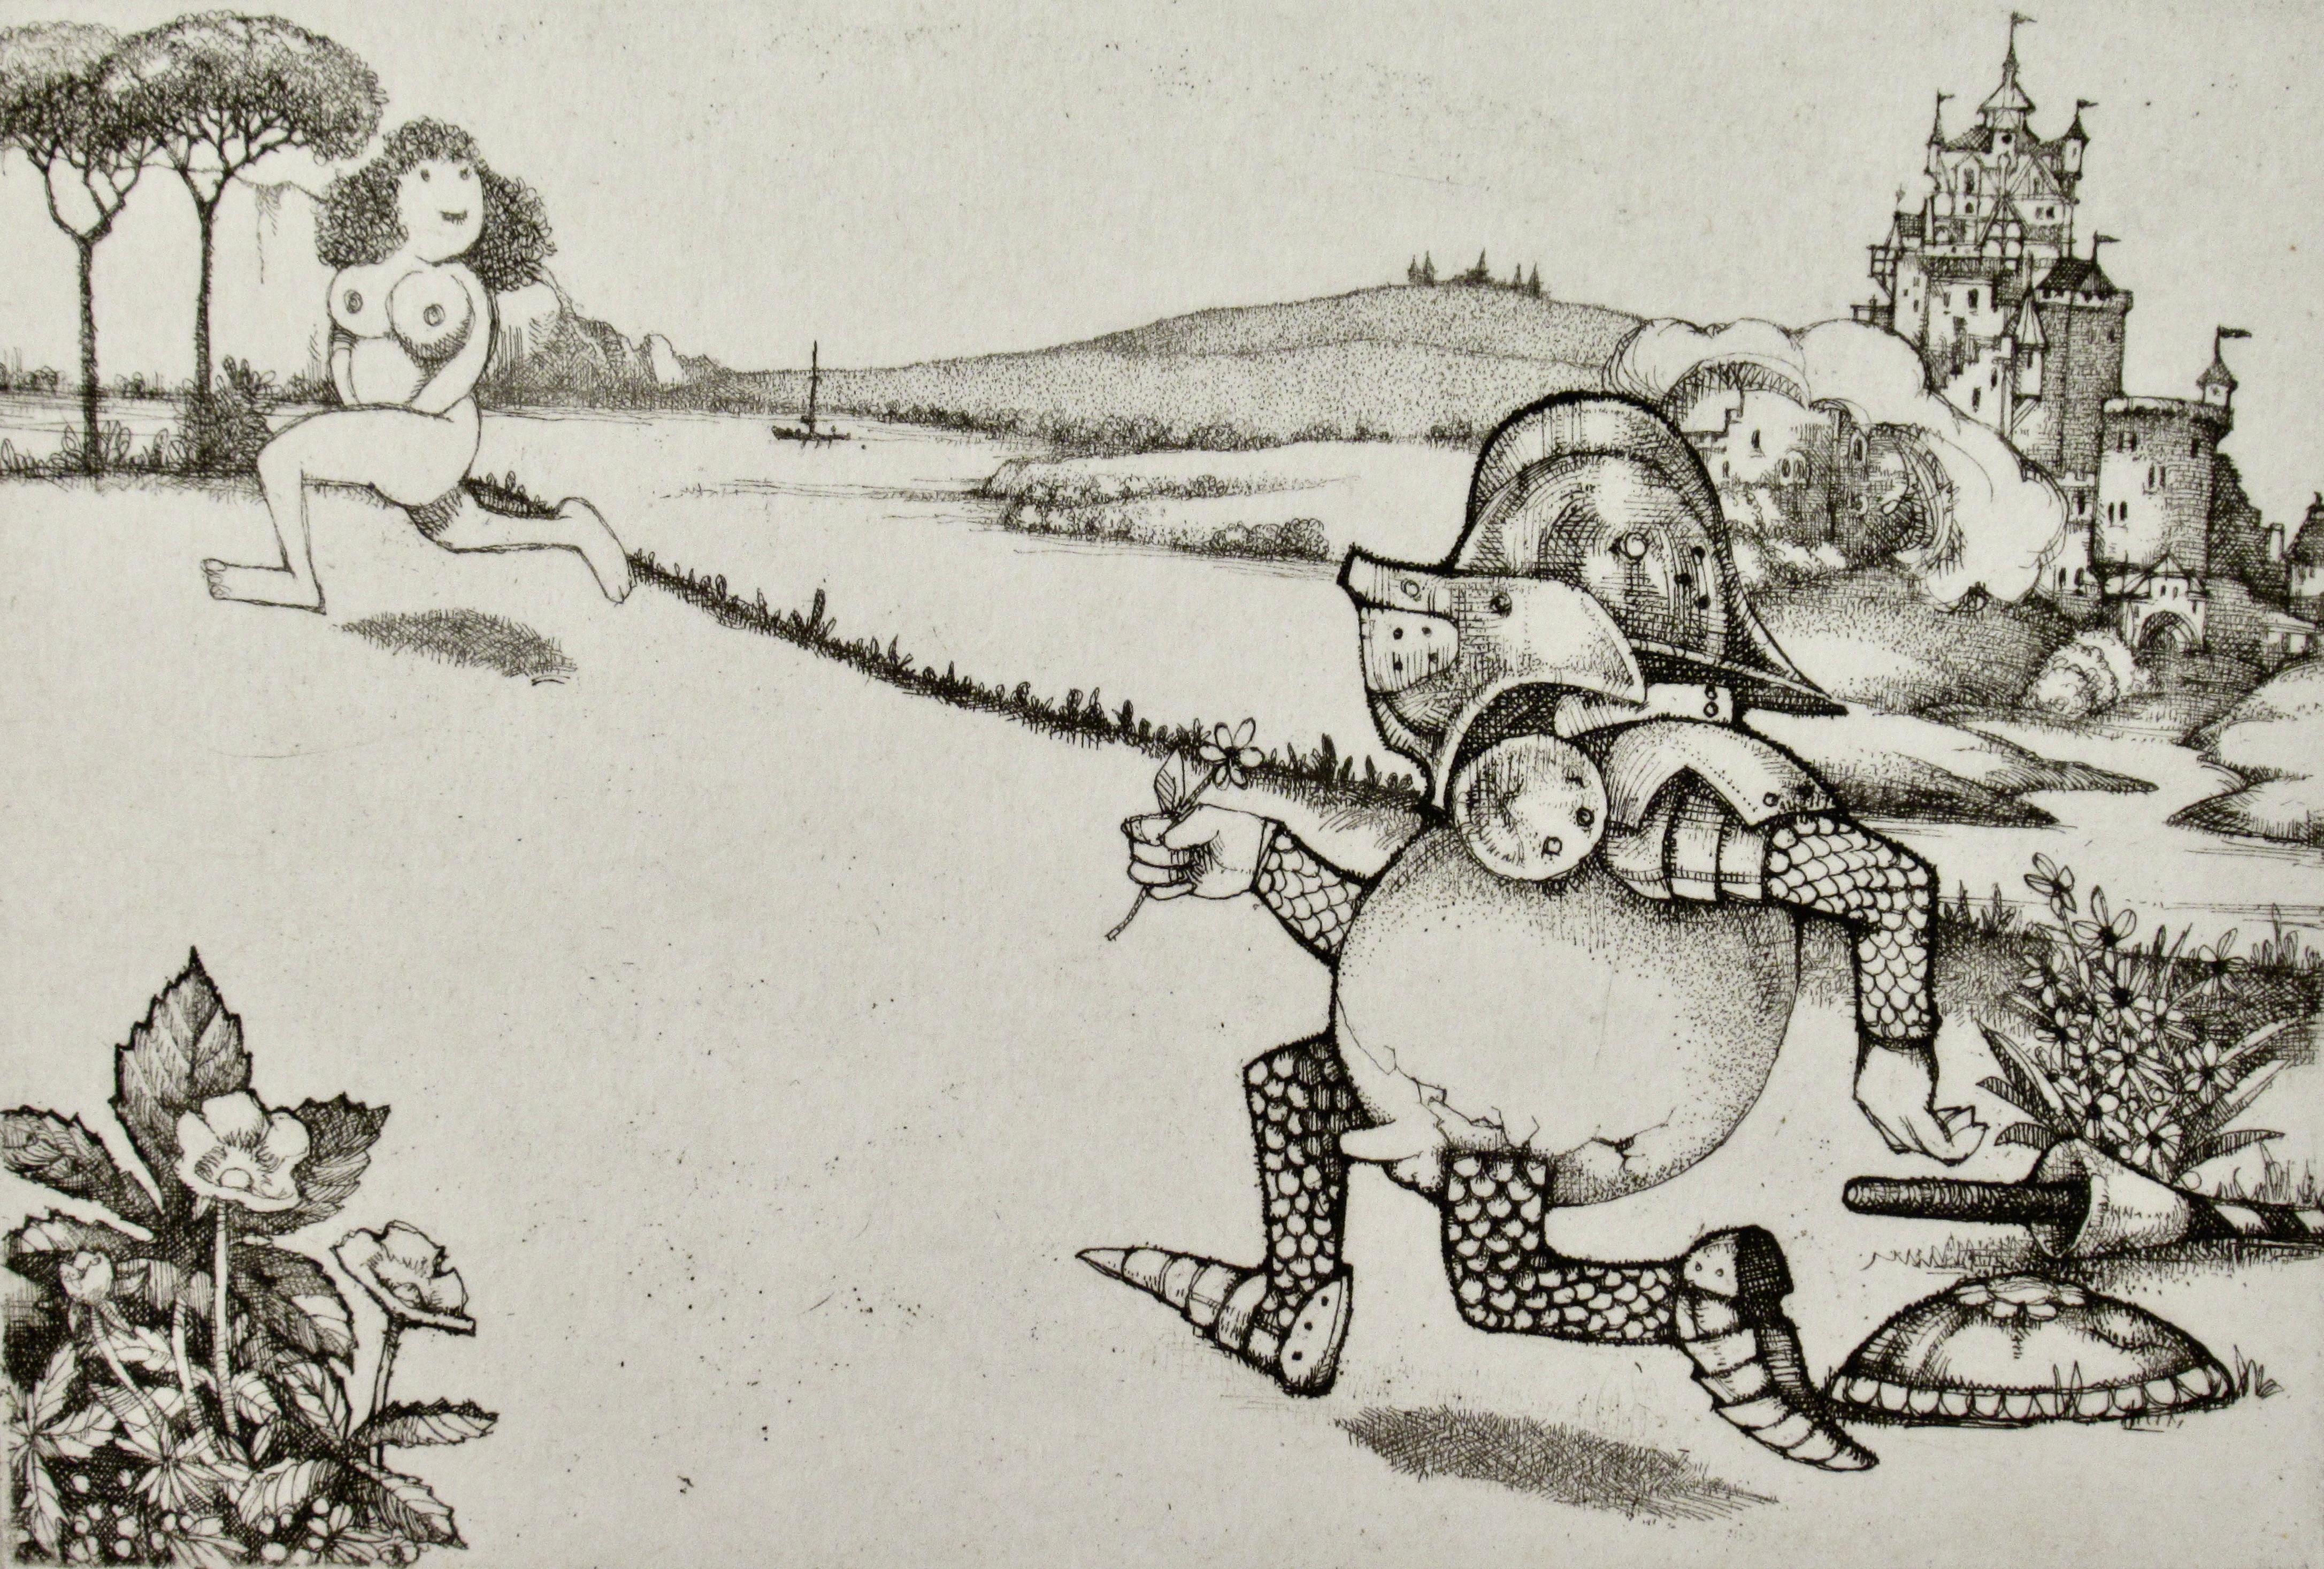 Knight Running After a Girl - Print by Charles Bragg